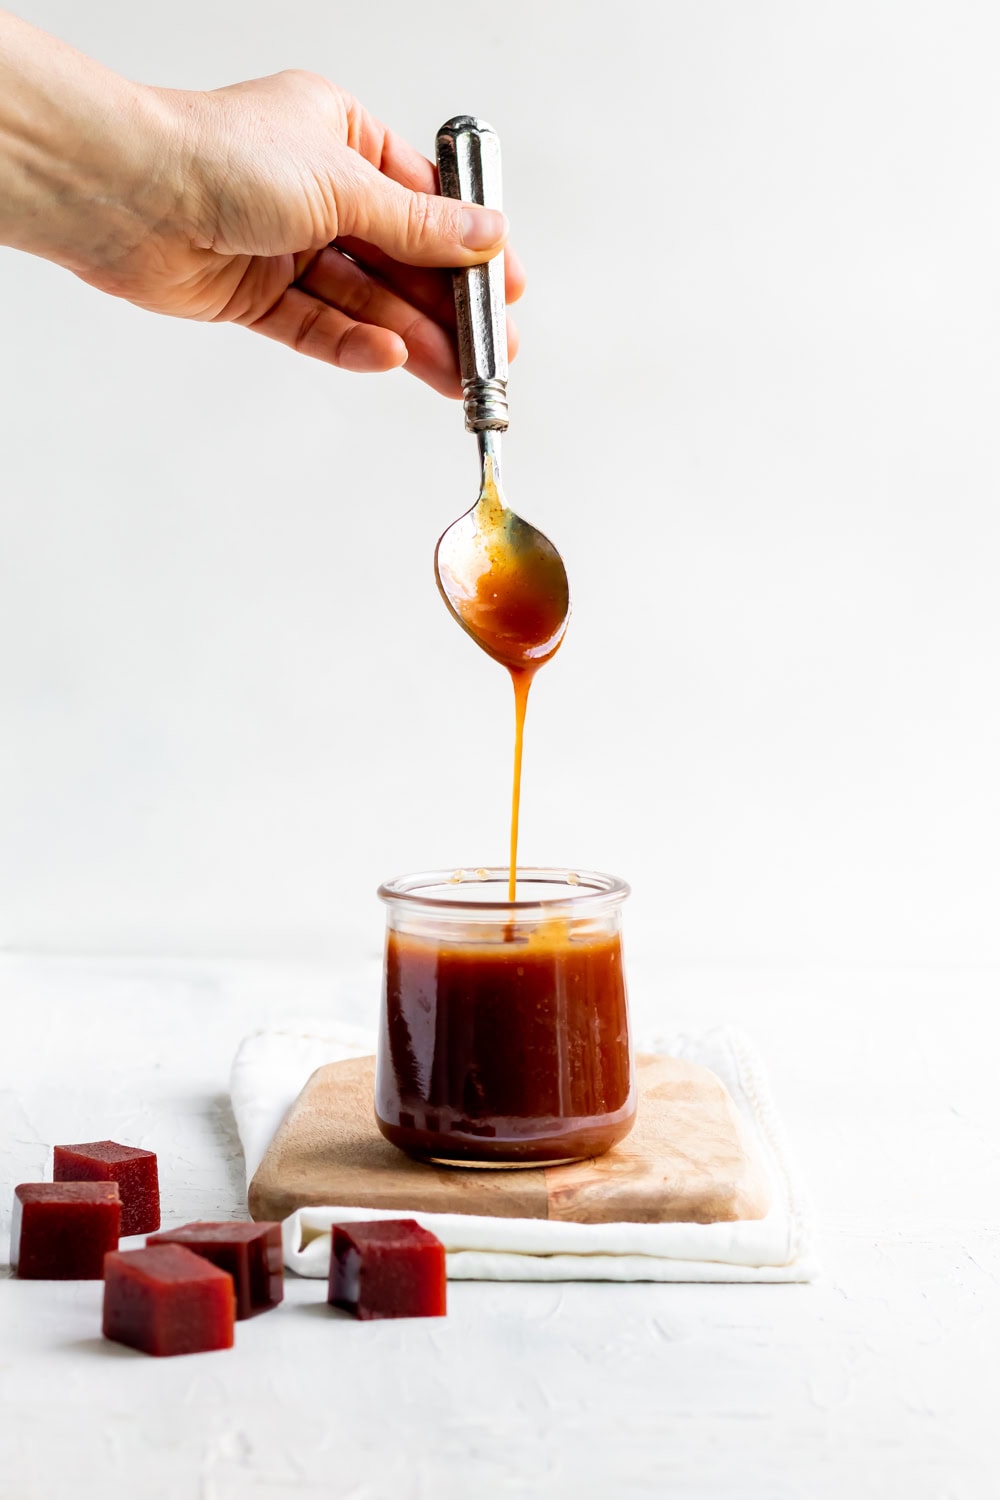 guava caramel sauce in a jar with a spoon drizzling sauce into the jar